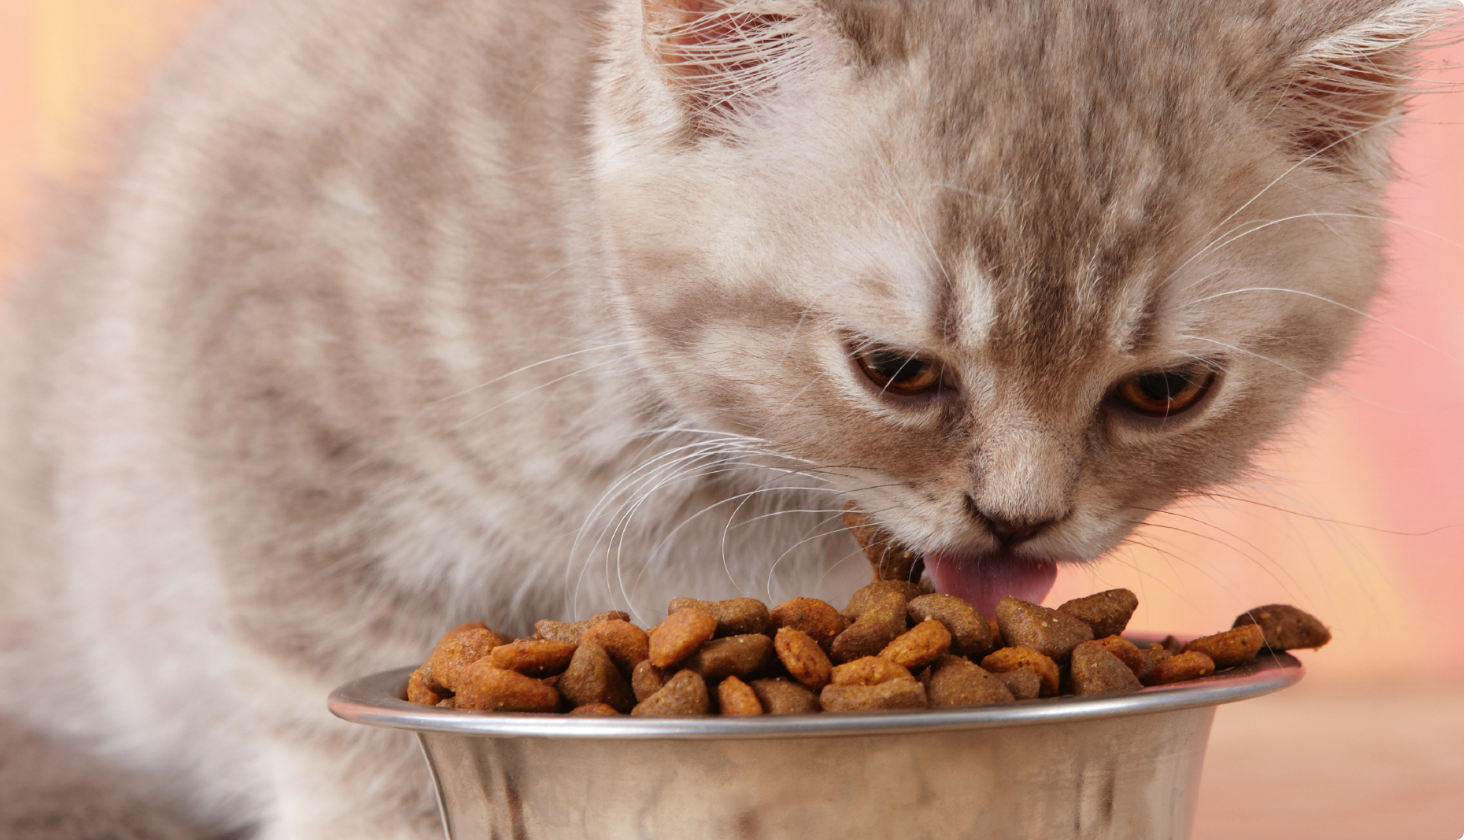 Kitten eating dry cat food from a bowl.